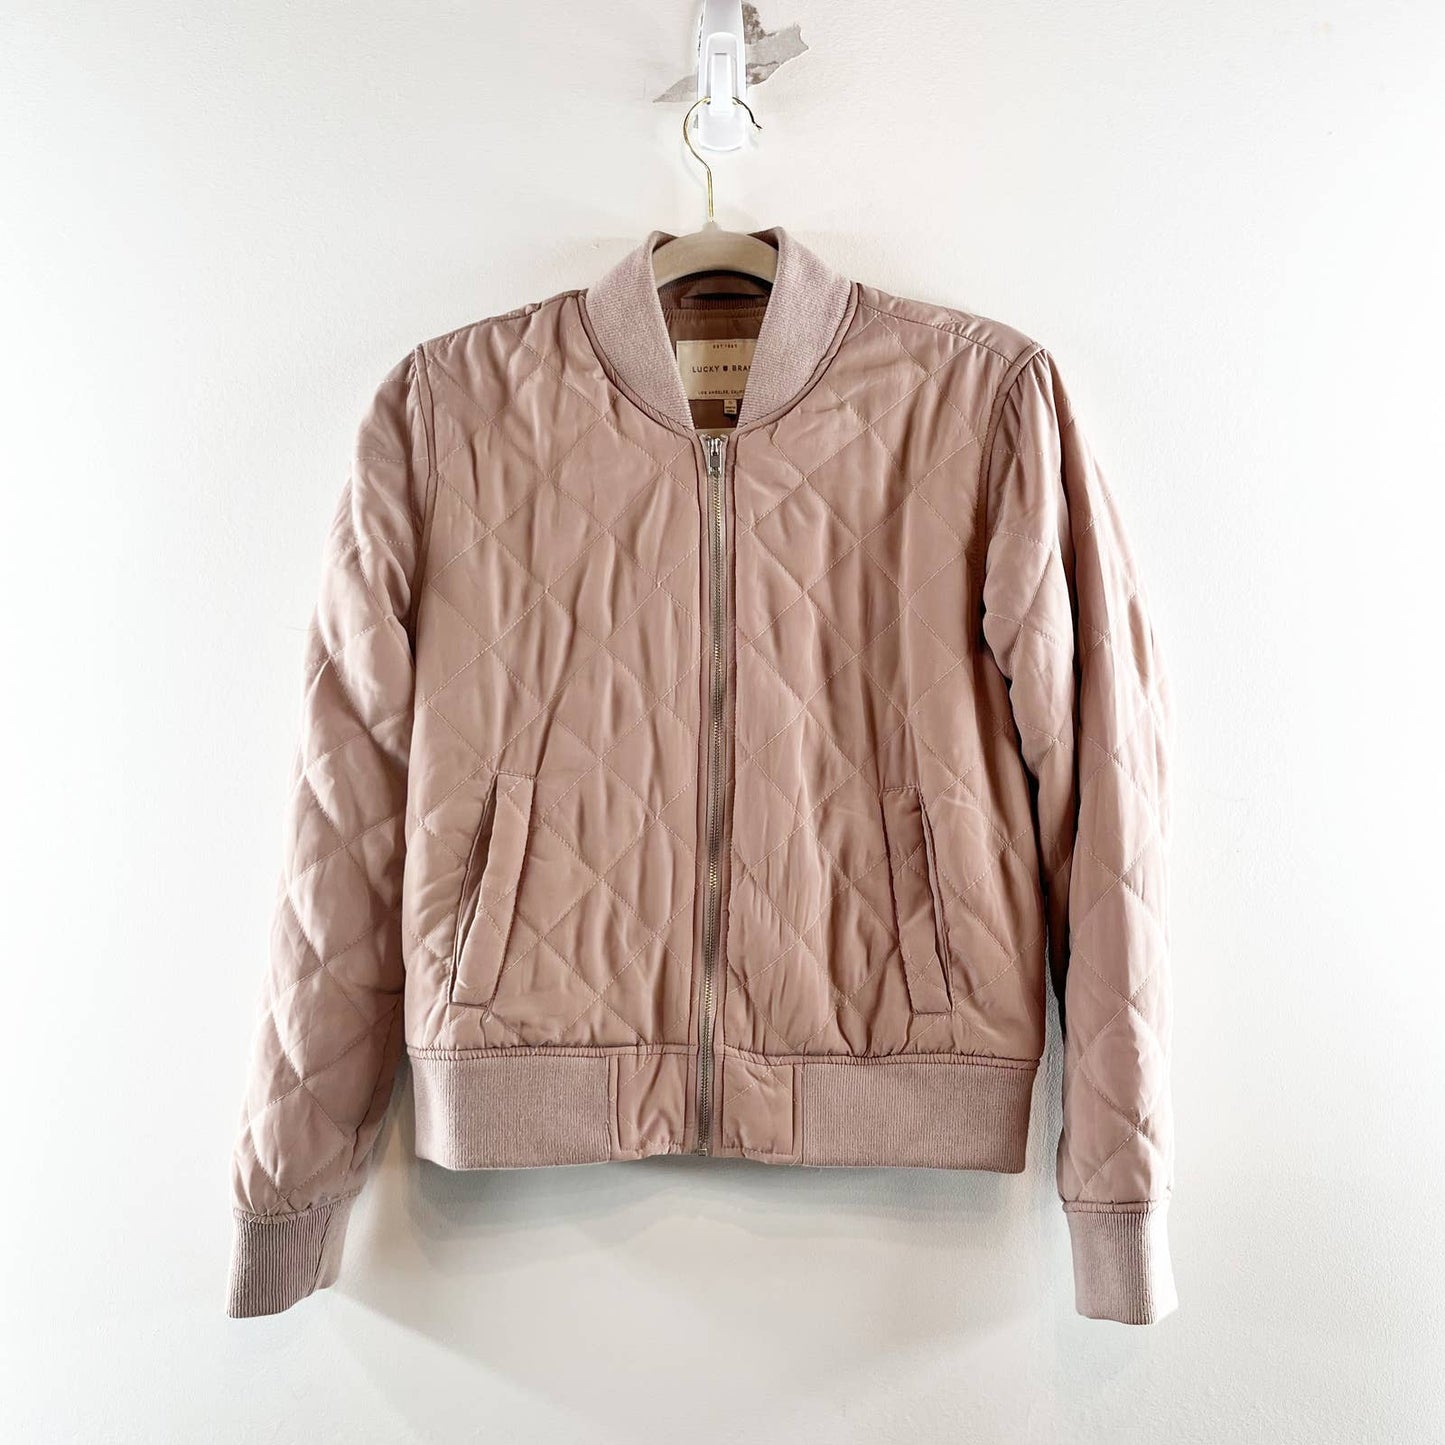 Lucky Brand Zip-Up Long Sleeve Quilted Bomber Jacket Outerwear Blush Pink Small